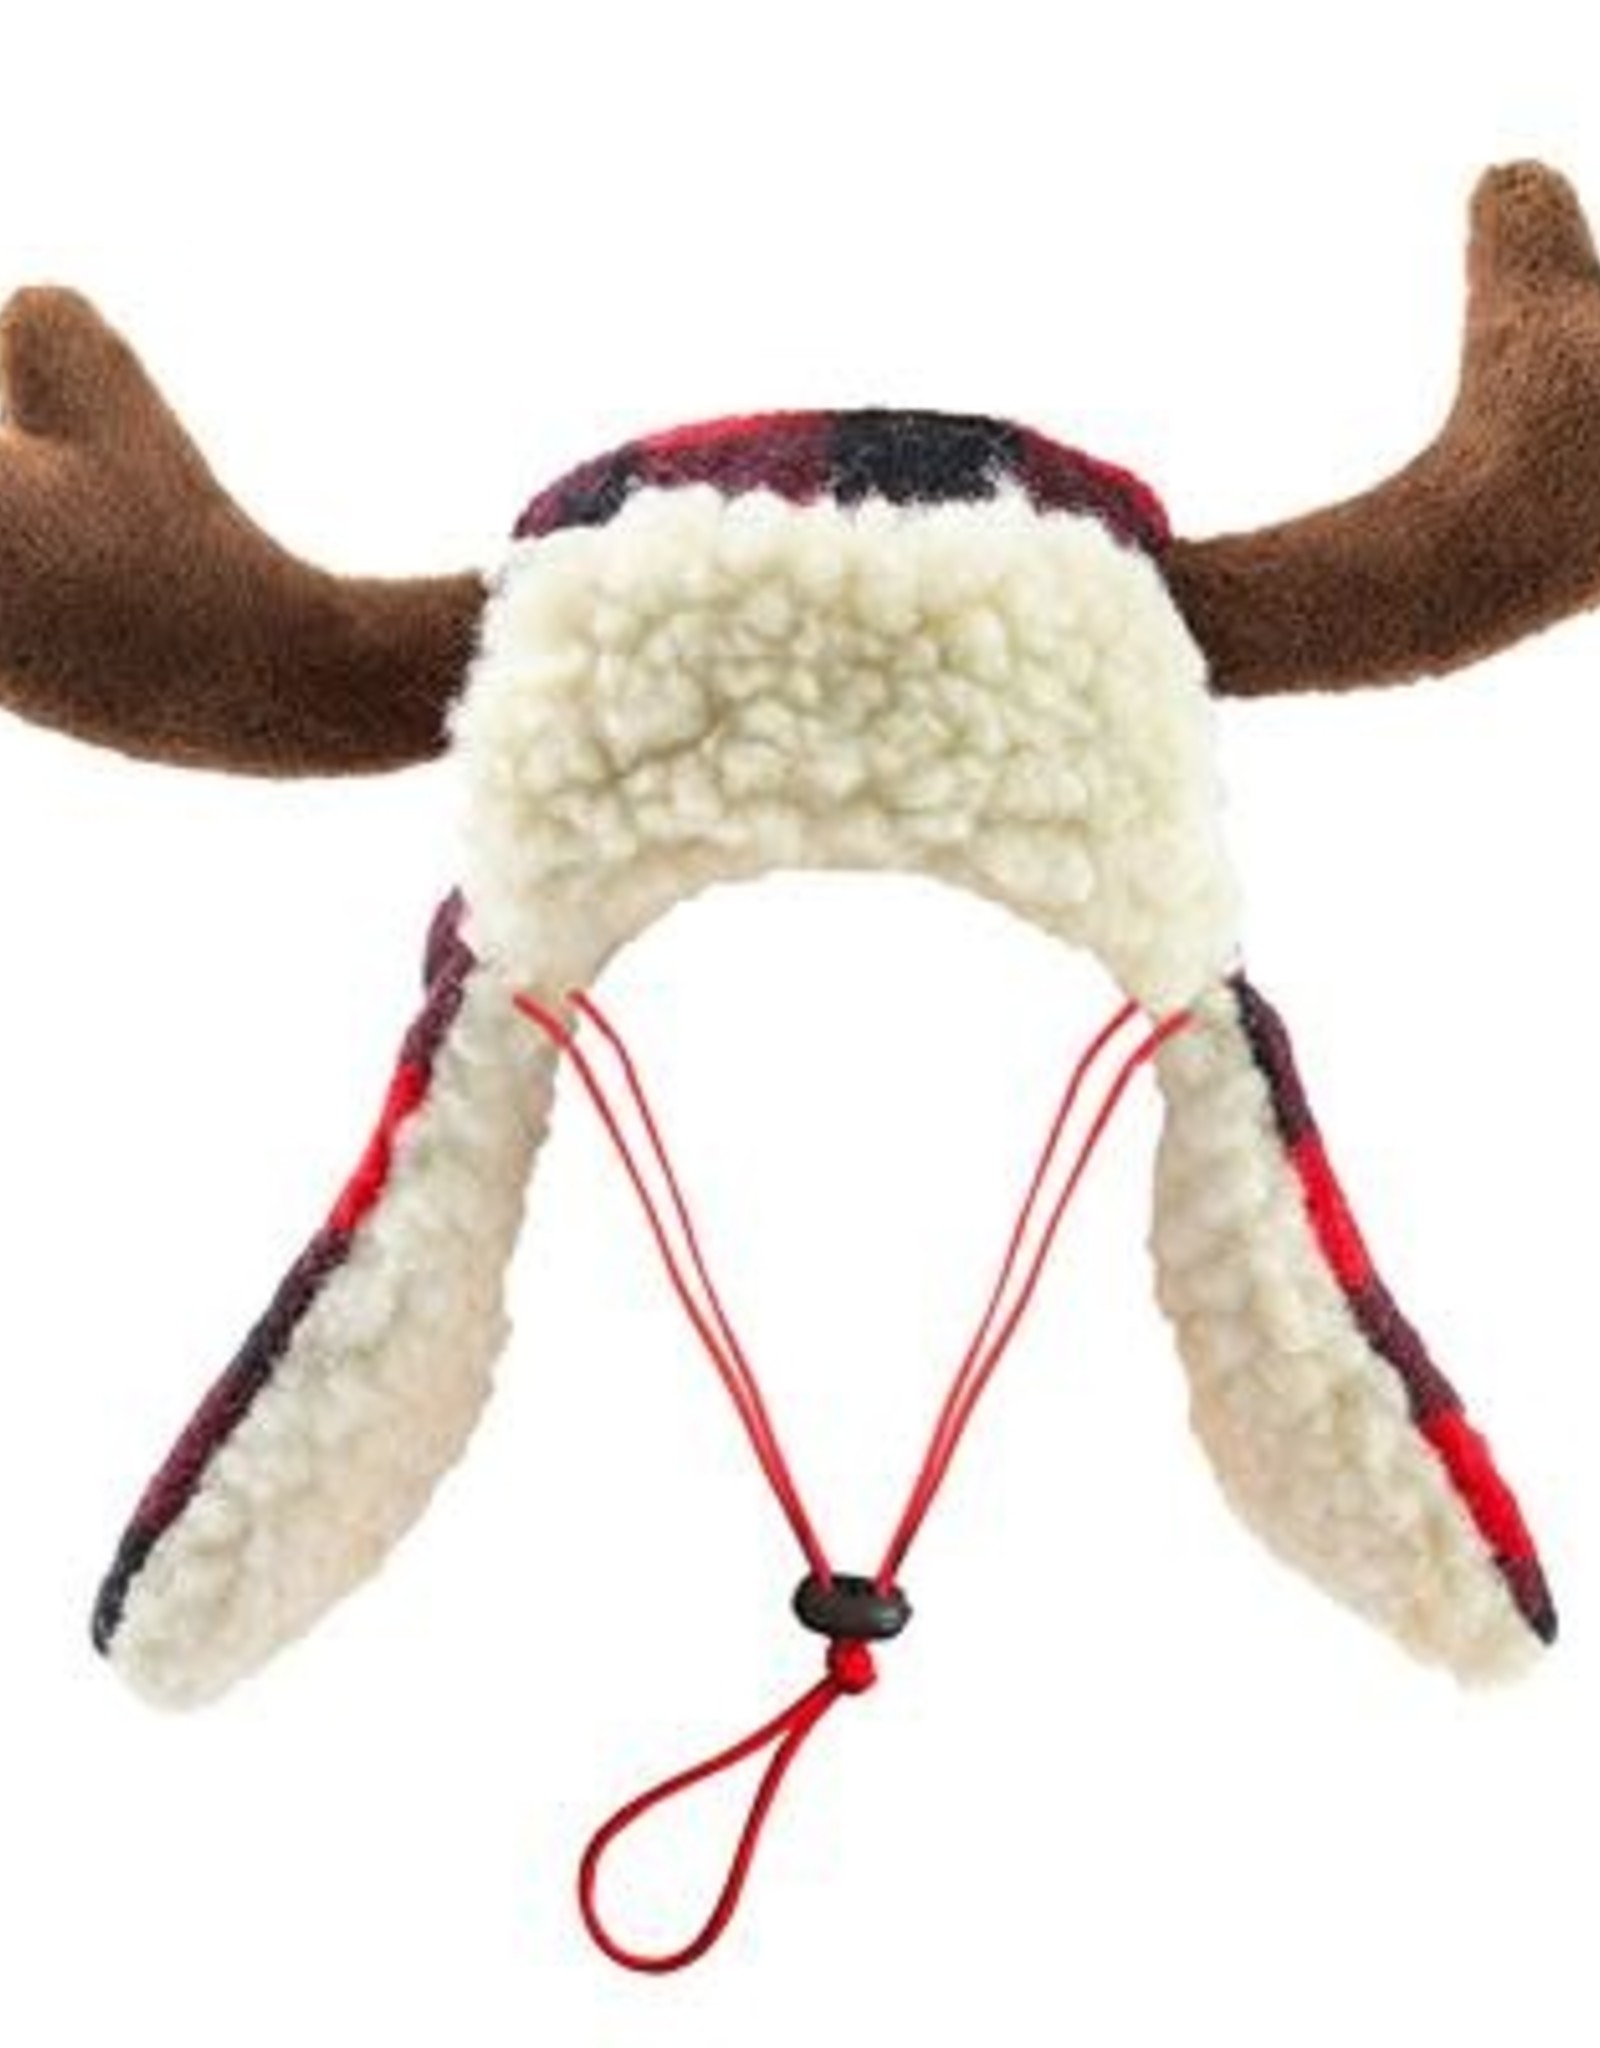 Huxley & Kent Buffalo Check Trapper Hat with Snug Fit by Huxley & Kent